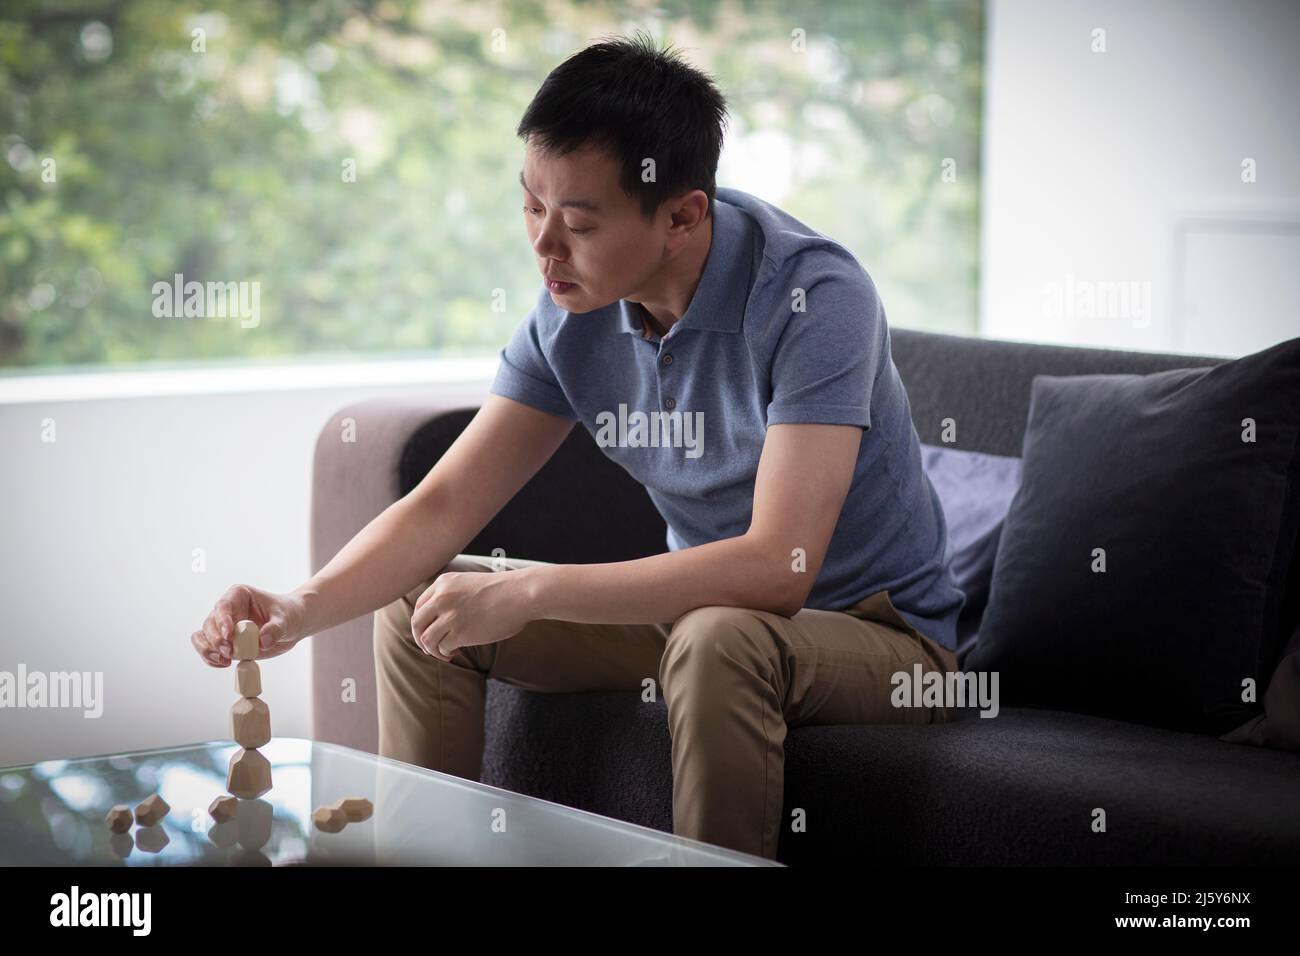 Man stacking wood pieces at coffee table in living room Stock Photo